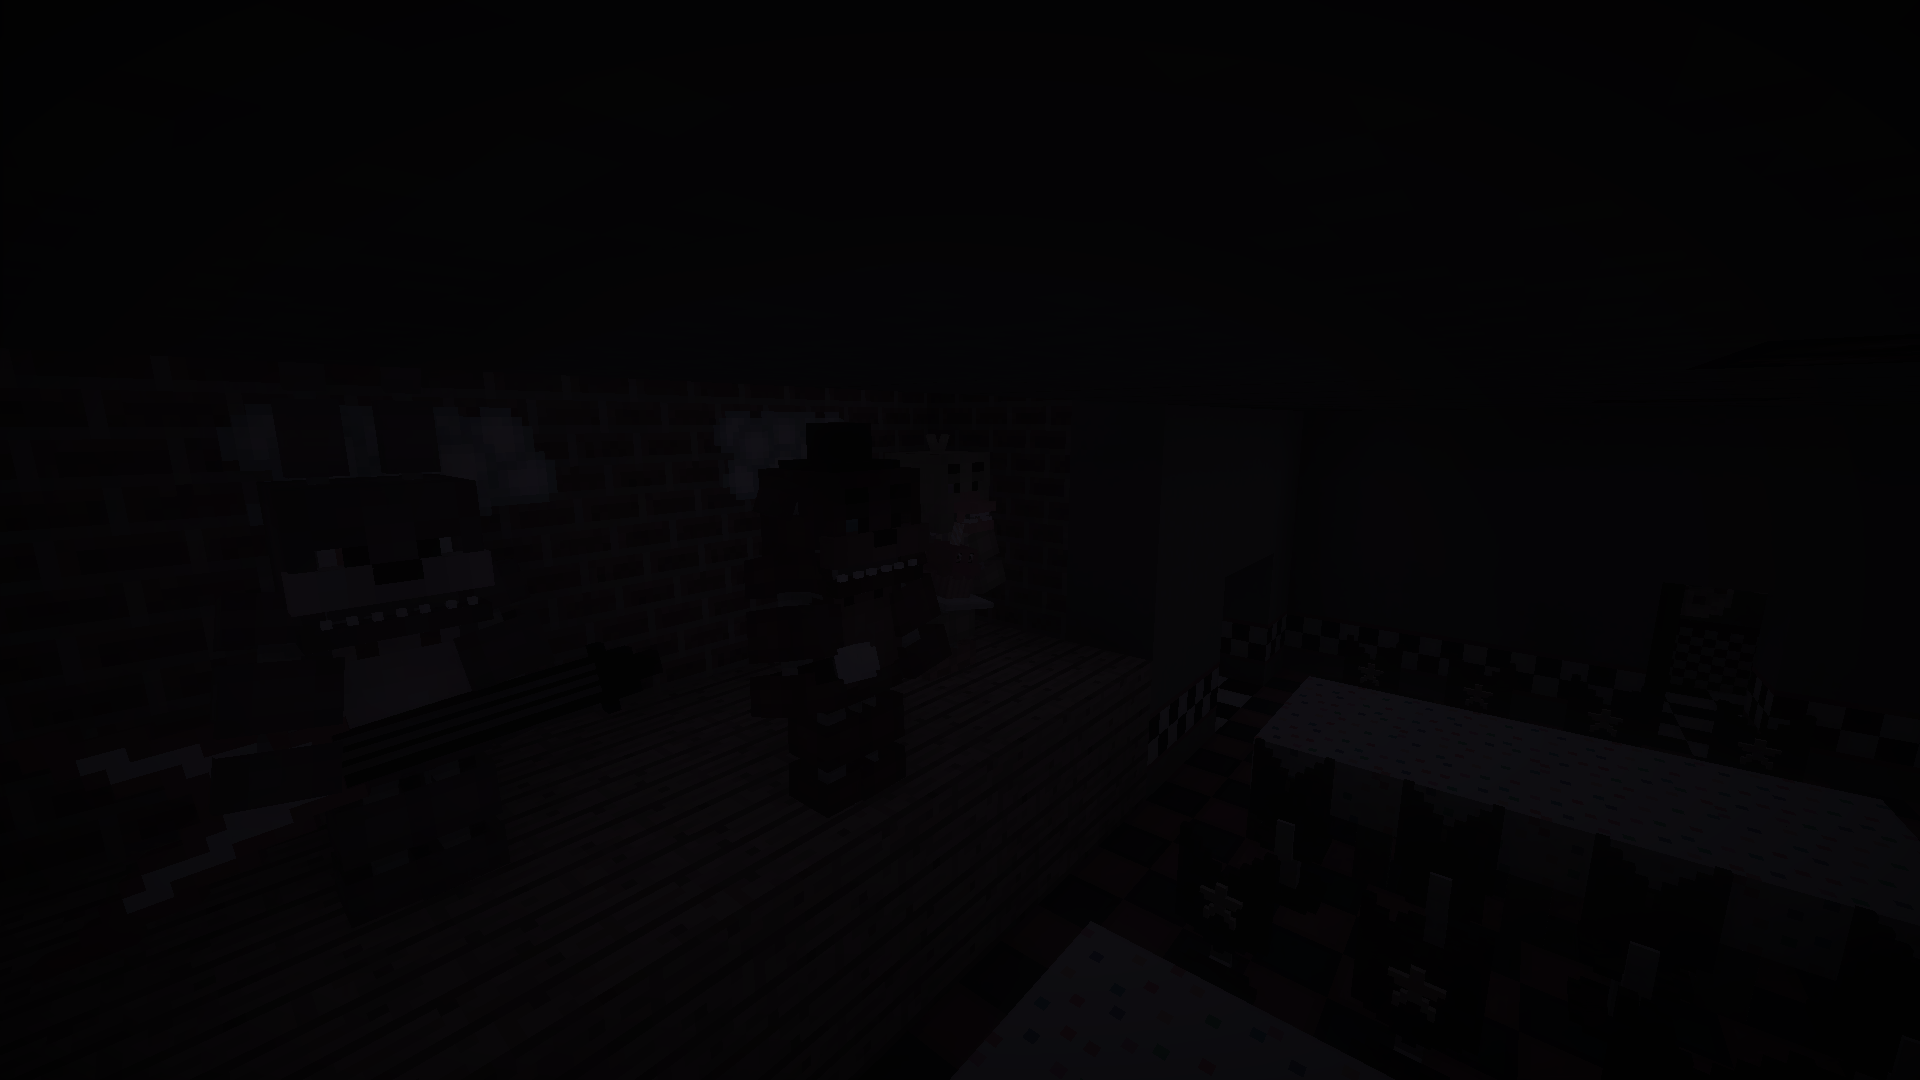 Five Nights at Freddy's 1 Map With 3D Models 1.8 Forge with resorces pack  Minecraft Map